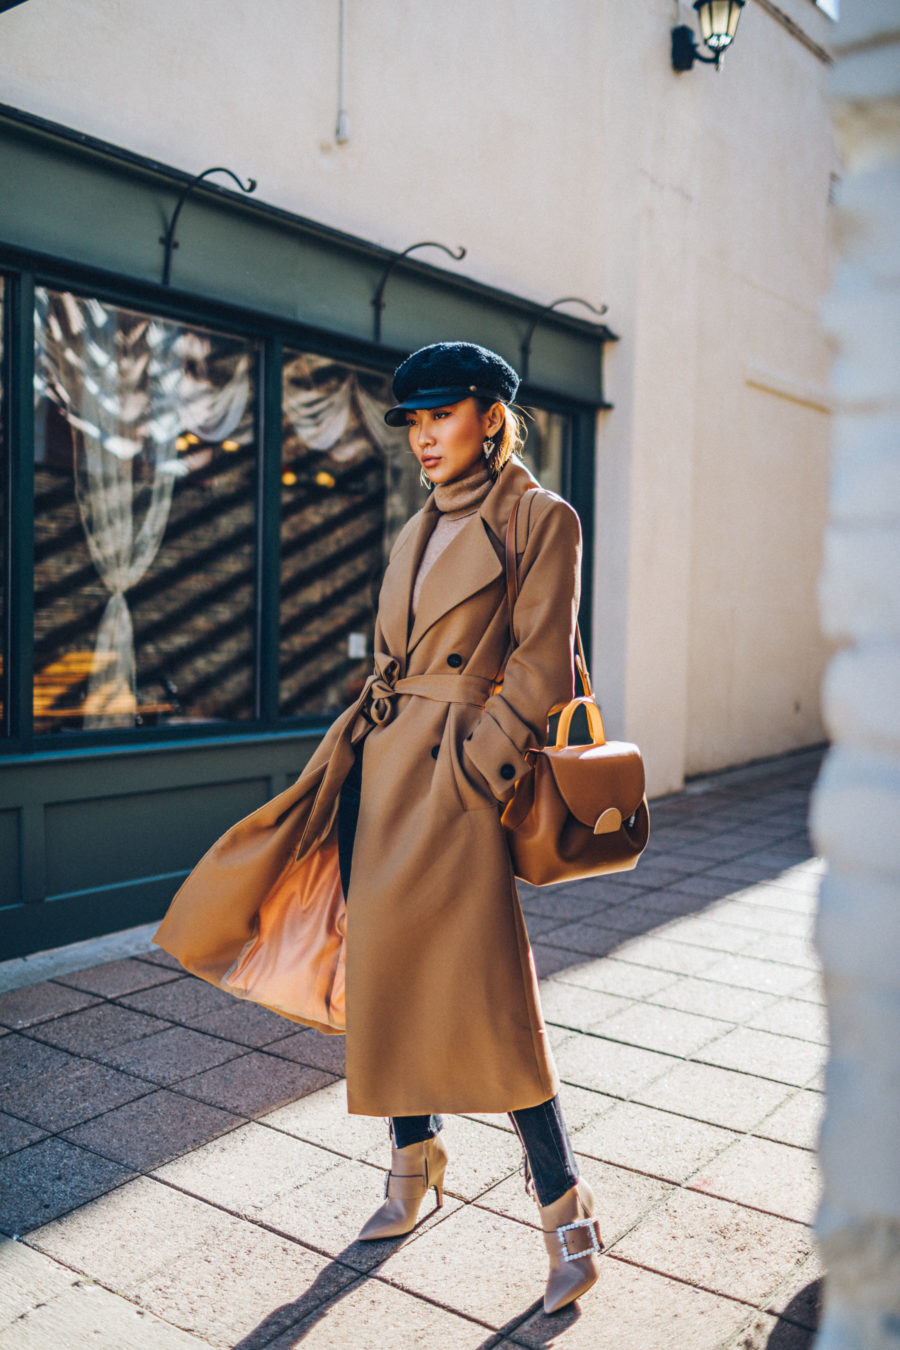 Clothing items worth investing in - Belted Camel Coat with Dark Denim Baker Boy Cap and Satchel // Notjessfashion.com